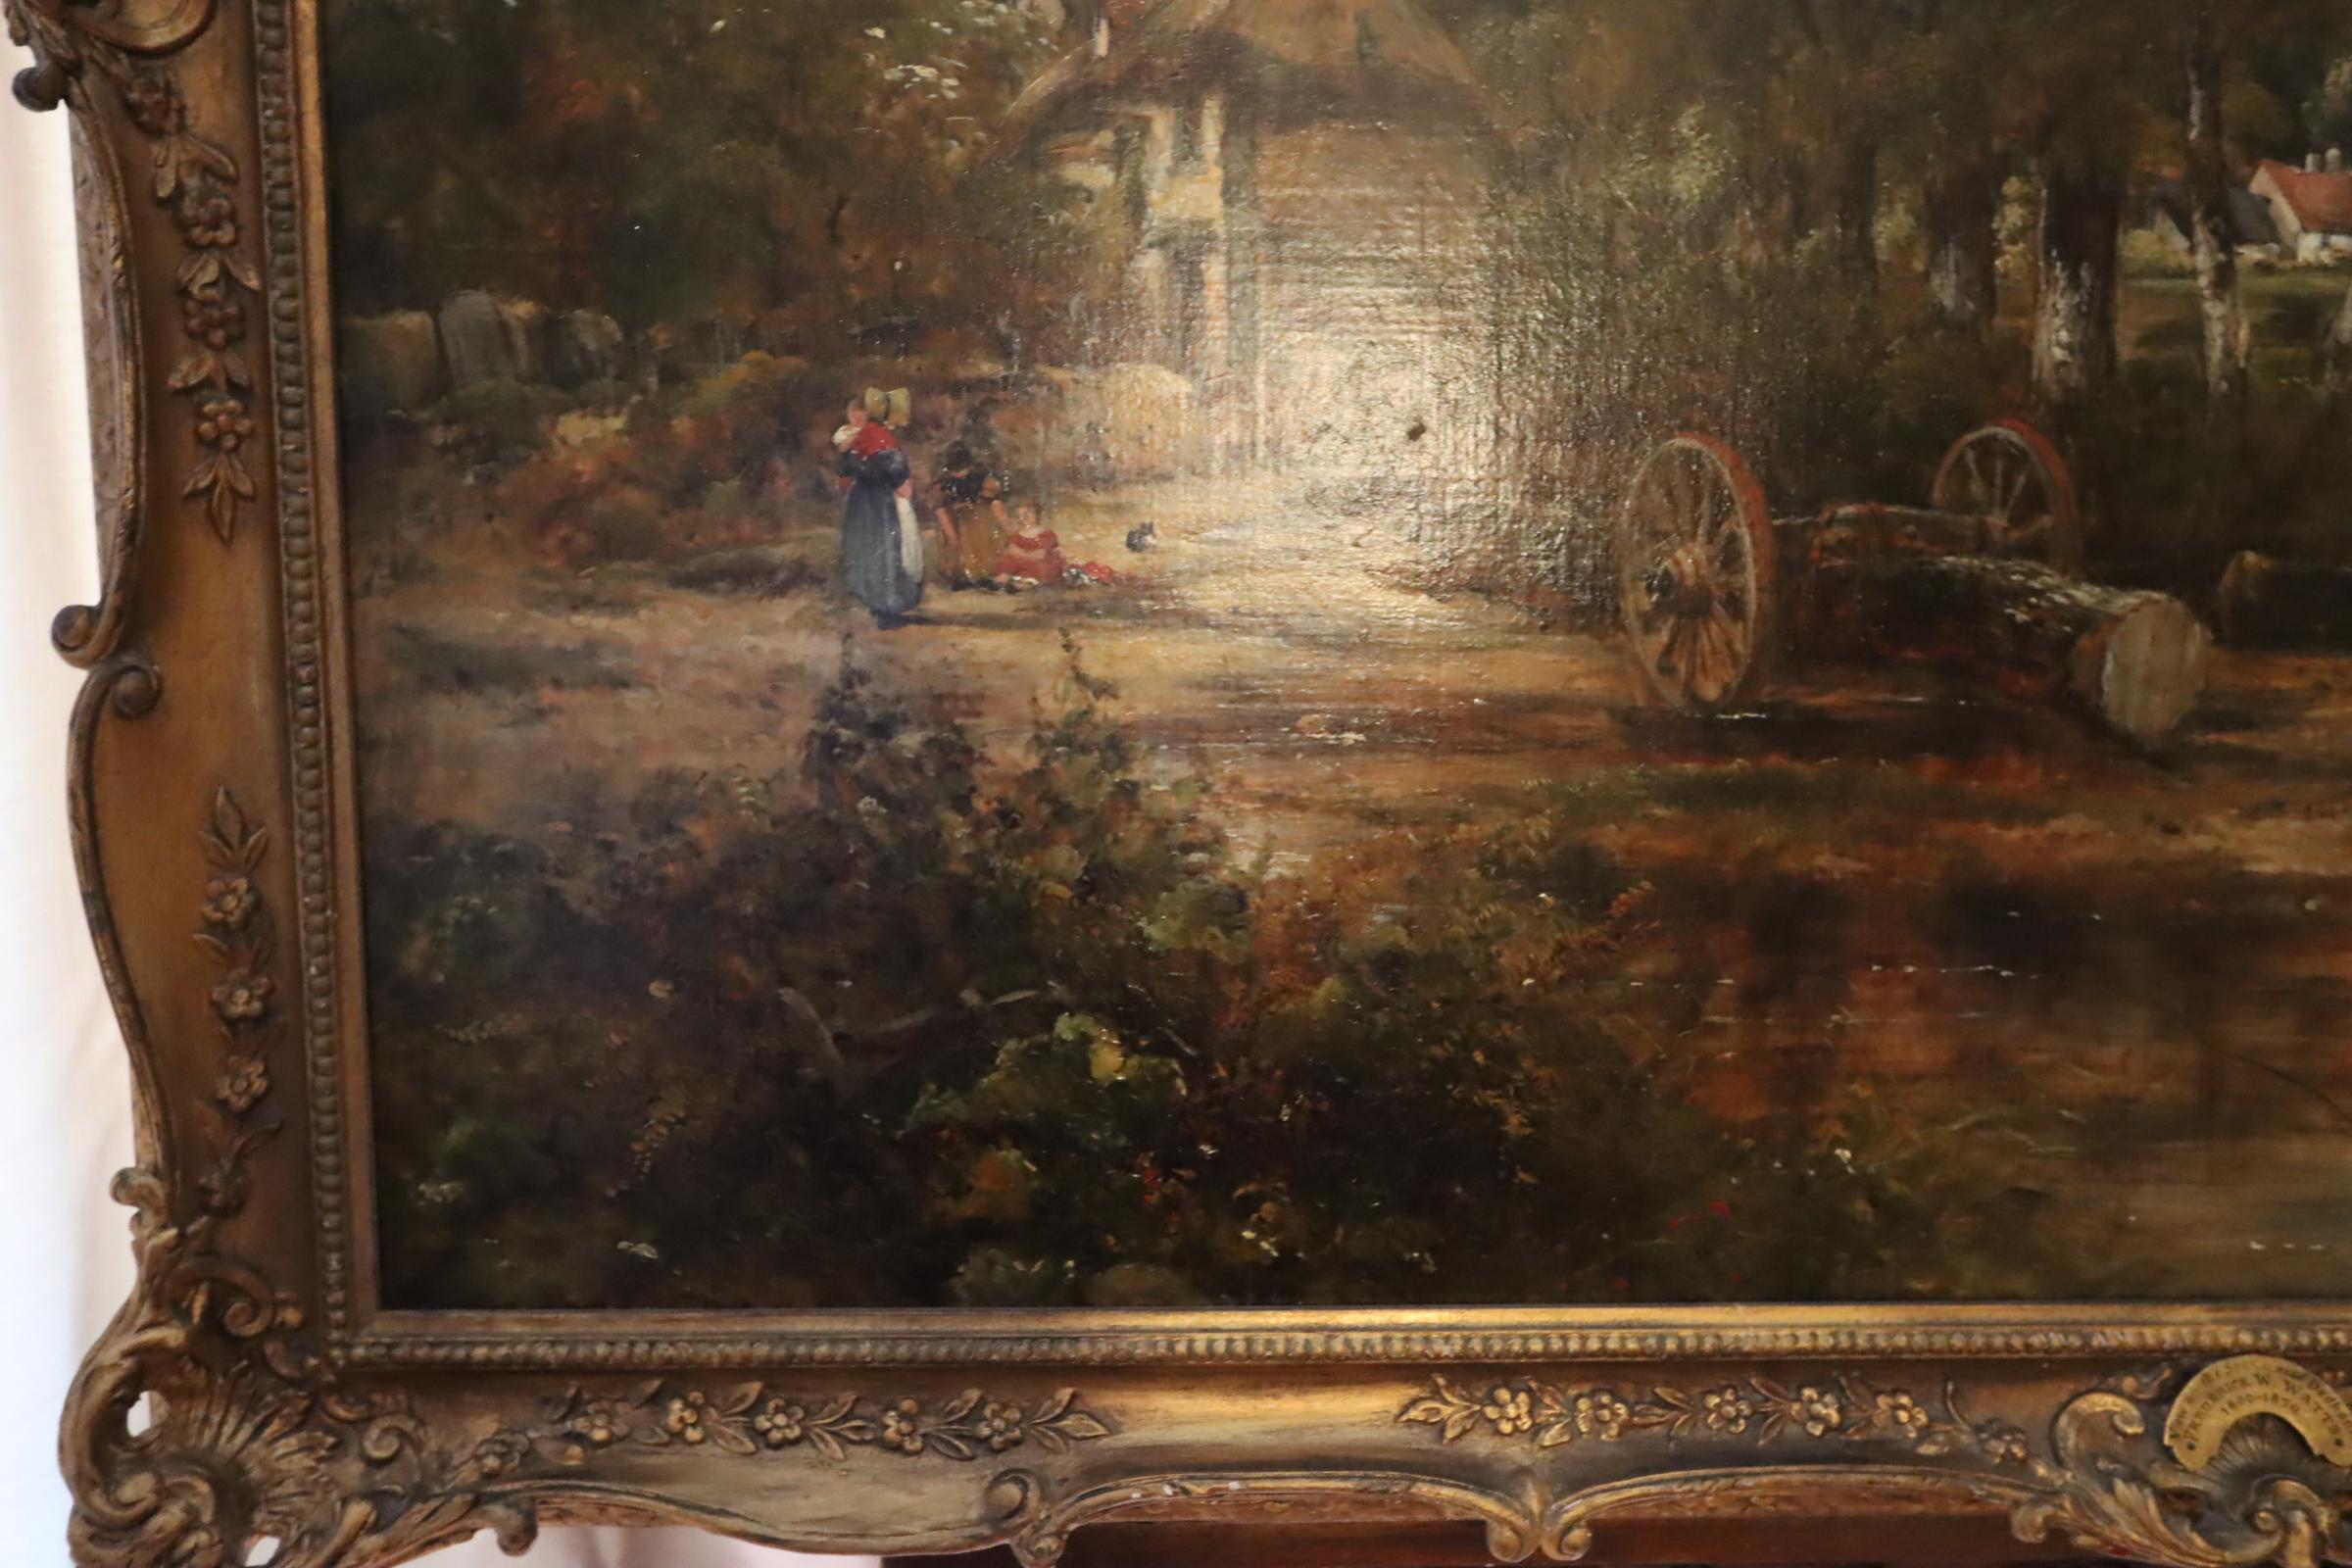 A beautiful landscape scene by Frederick Waters Watts whom was a contemporary follower of John Constable. This painting was purchased from a top leading Art Gallery in Bond Street for £245,000 20 years ago.
Oil on Canvas.
Unframed 58.5 x 38.5